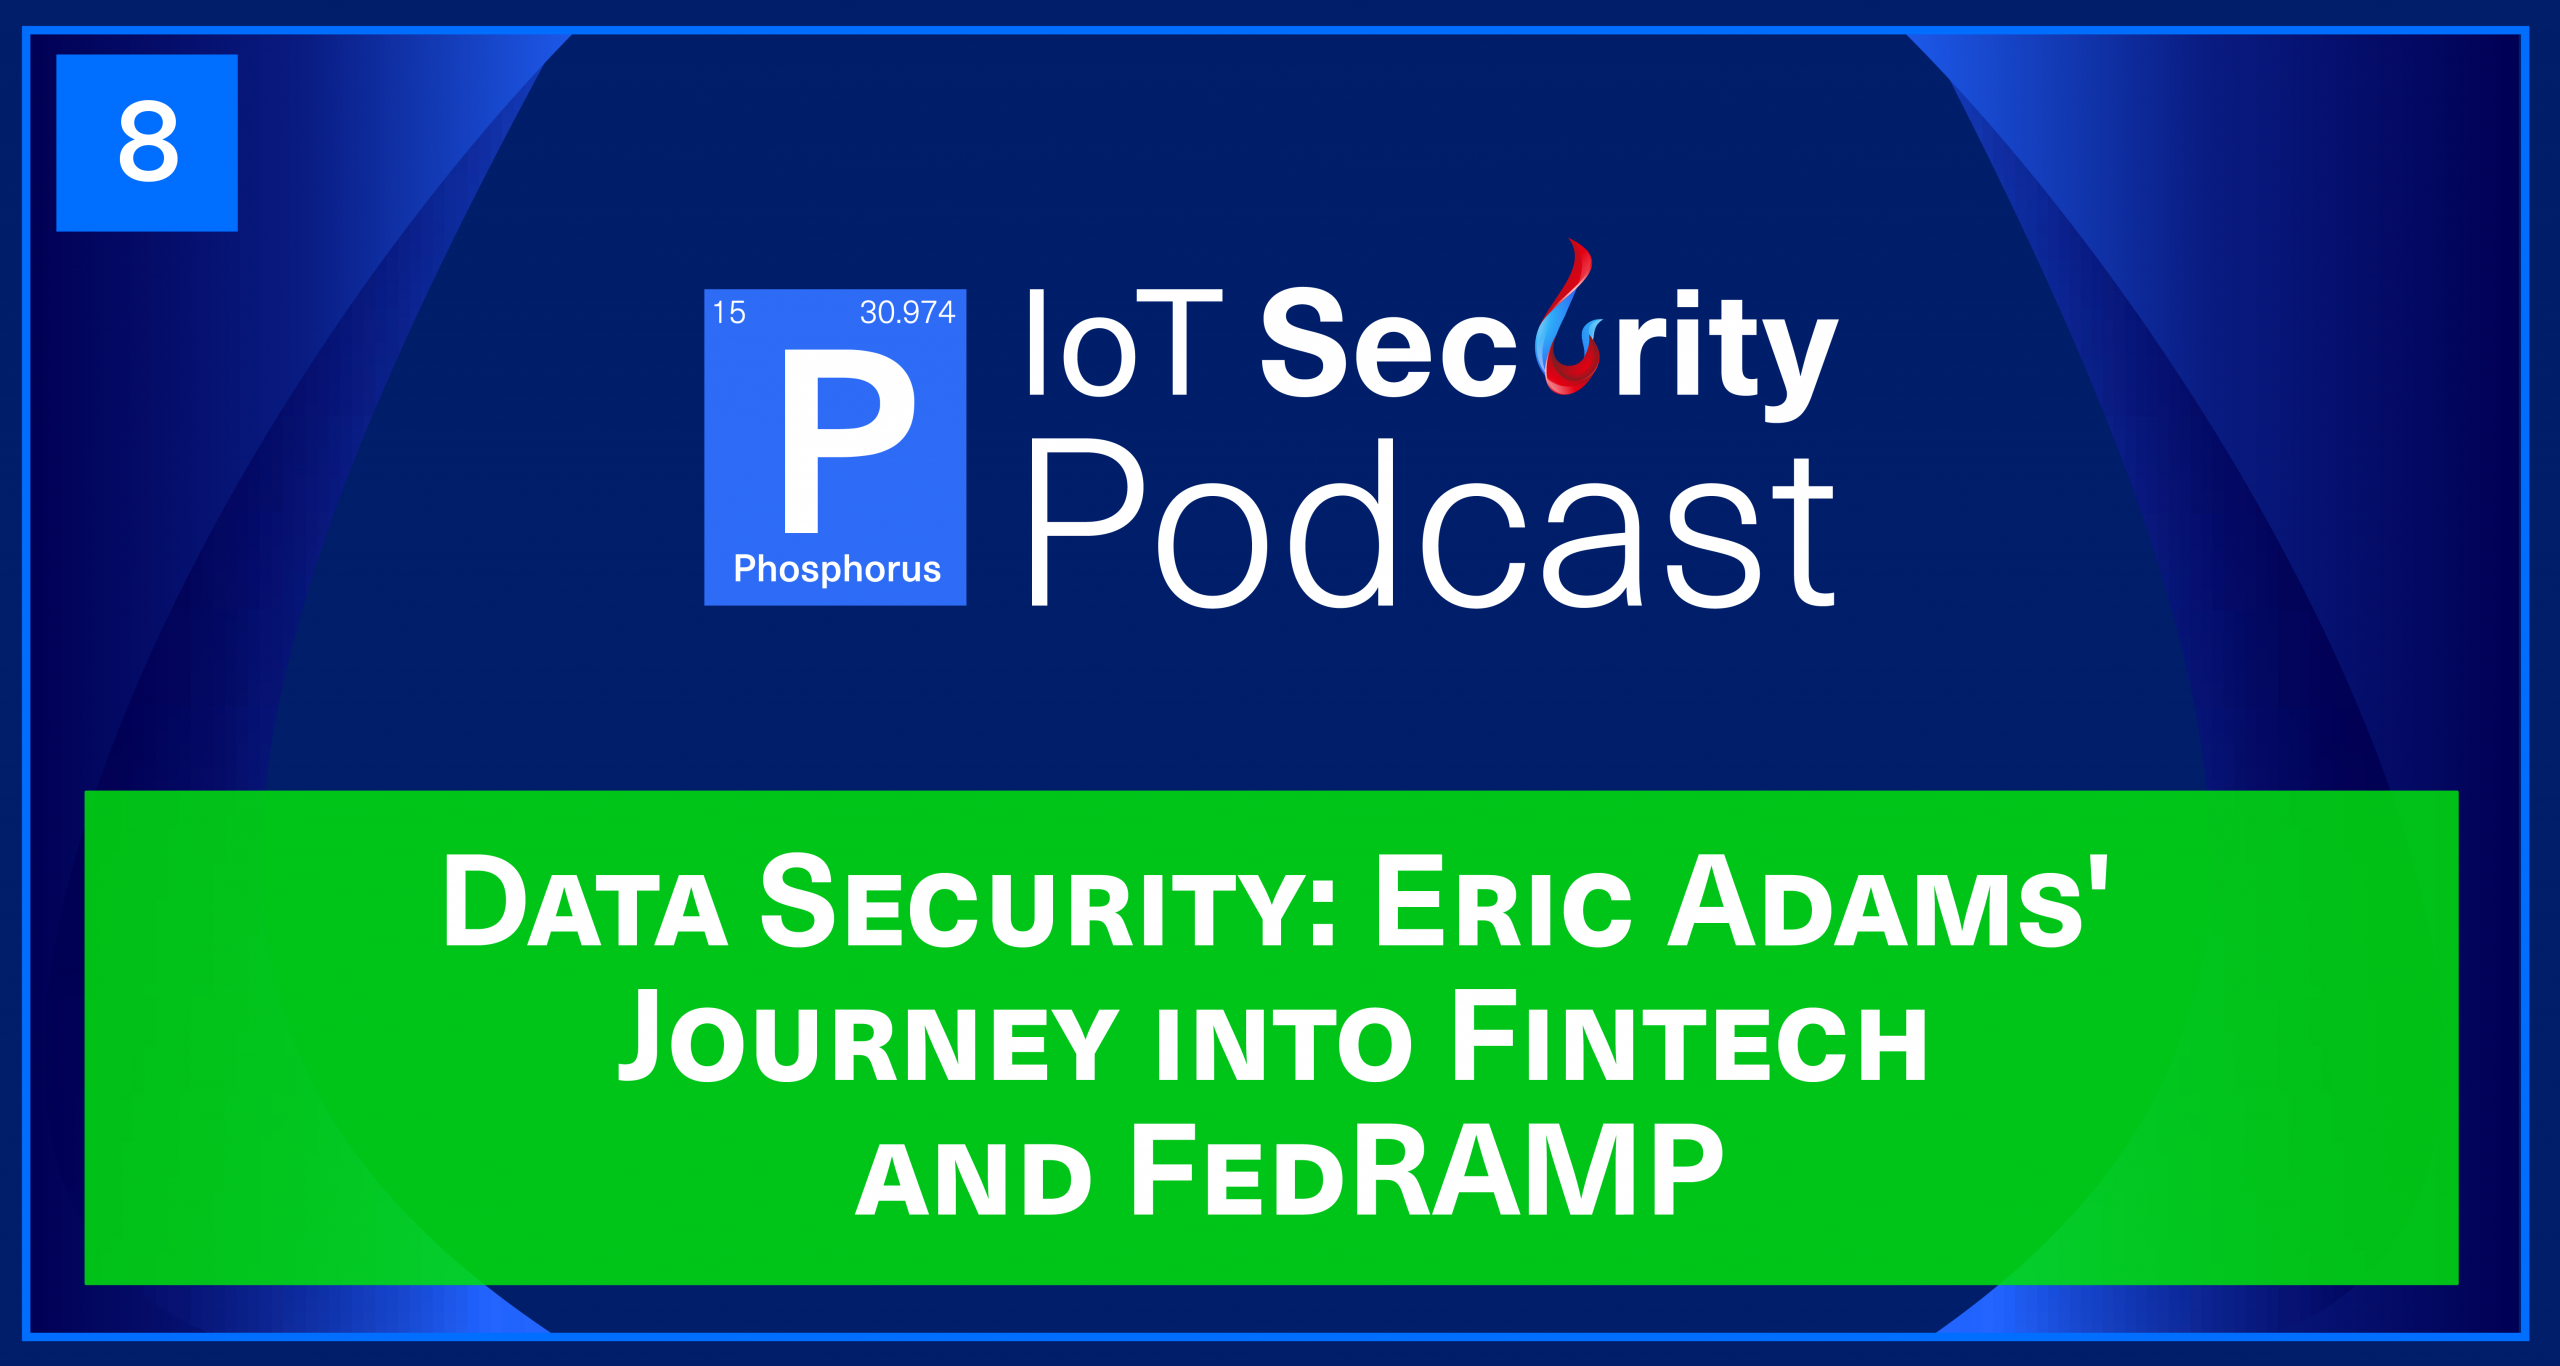 Data Security: Eric Adams' Journey into Fintech and FedRAMP